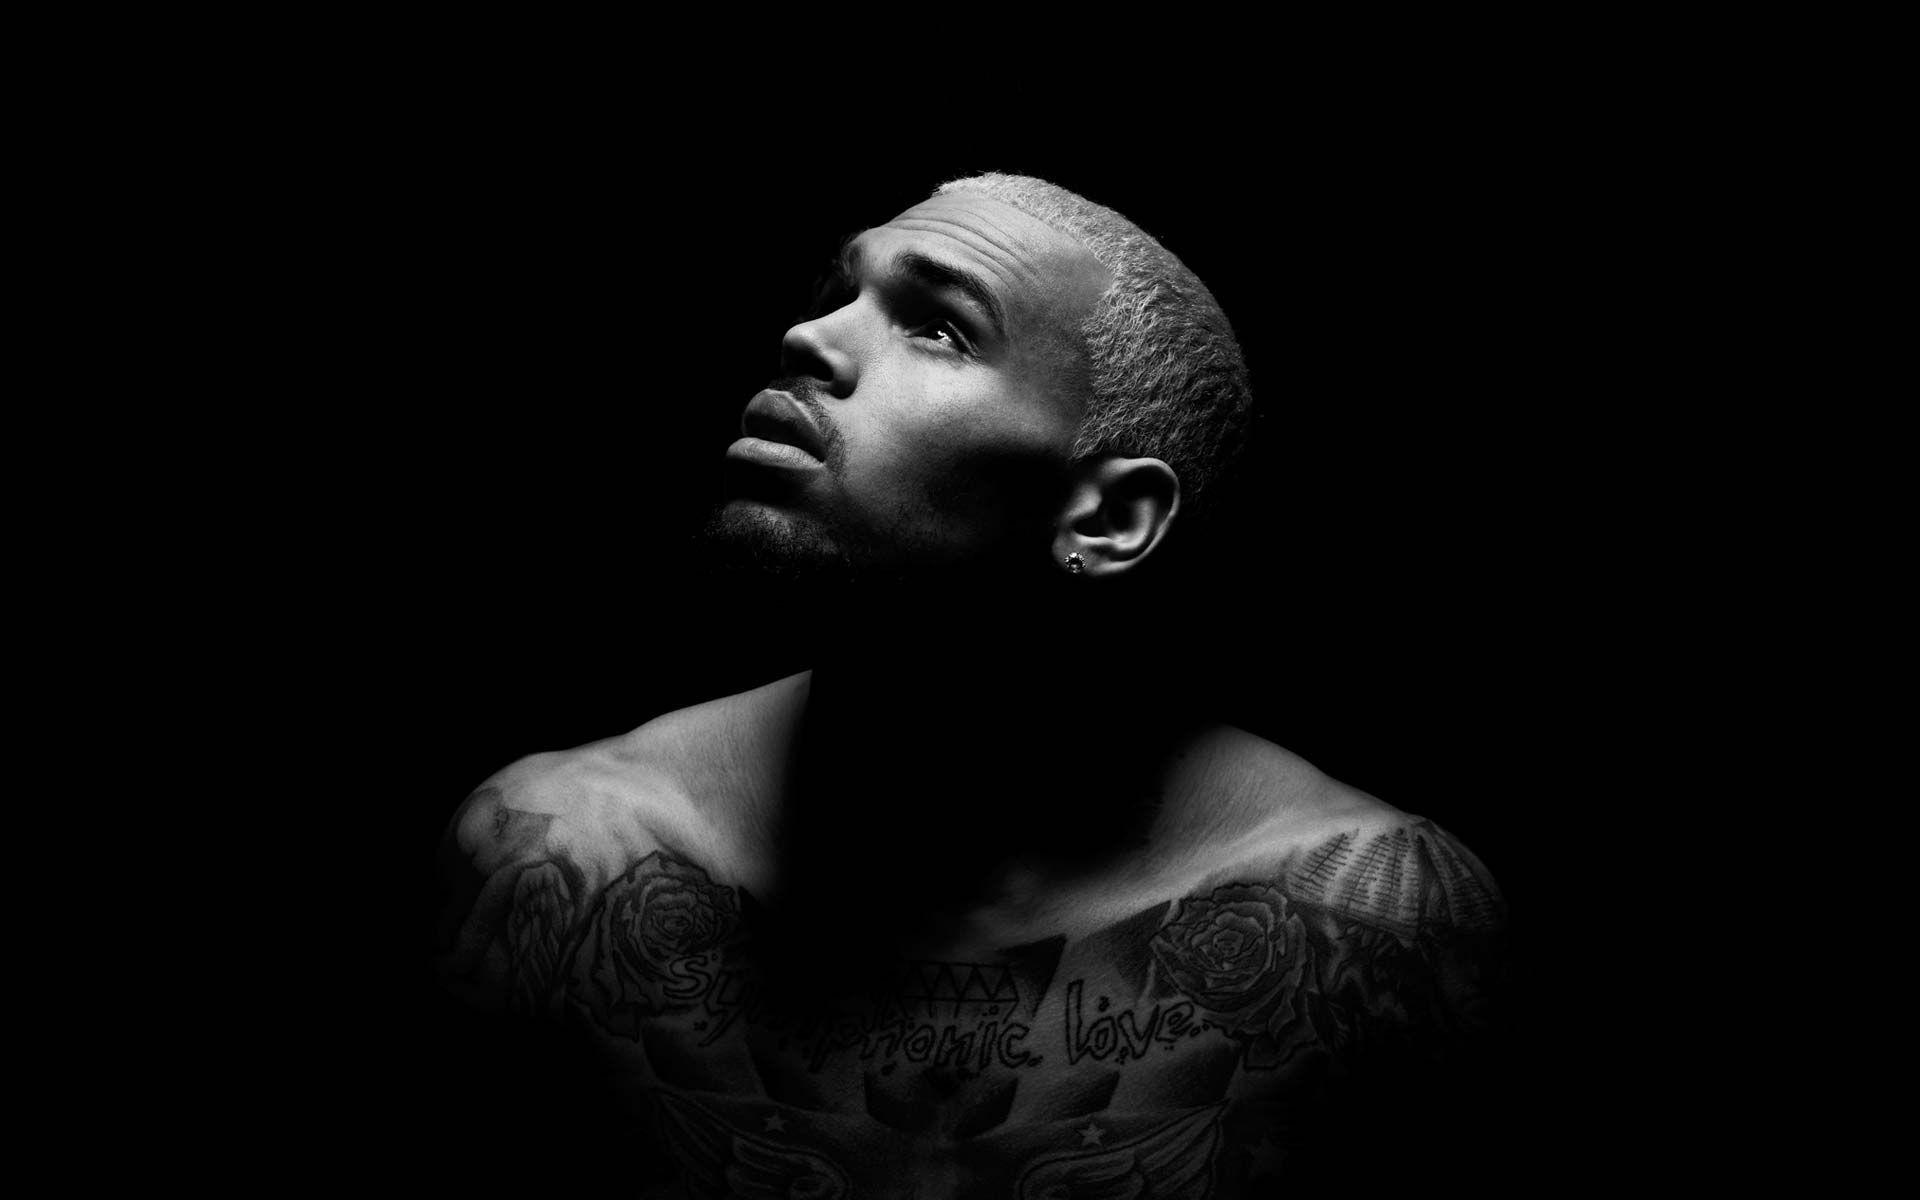 Chris Brown Wallpaper Collection For Free Download. HD Wallpaper